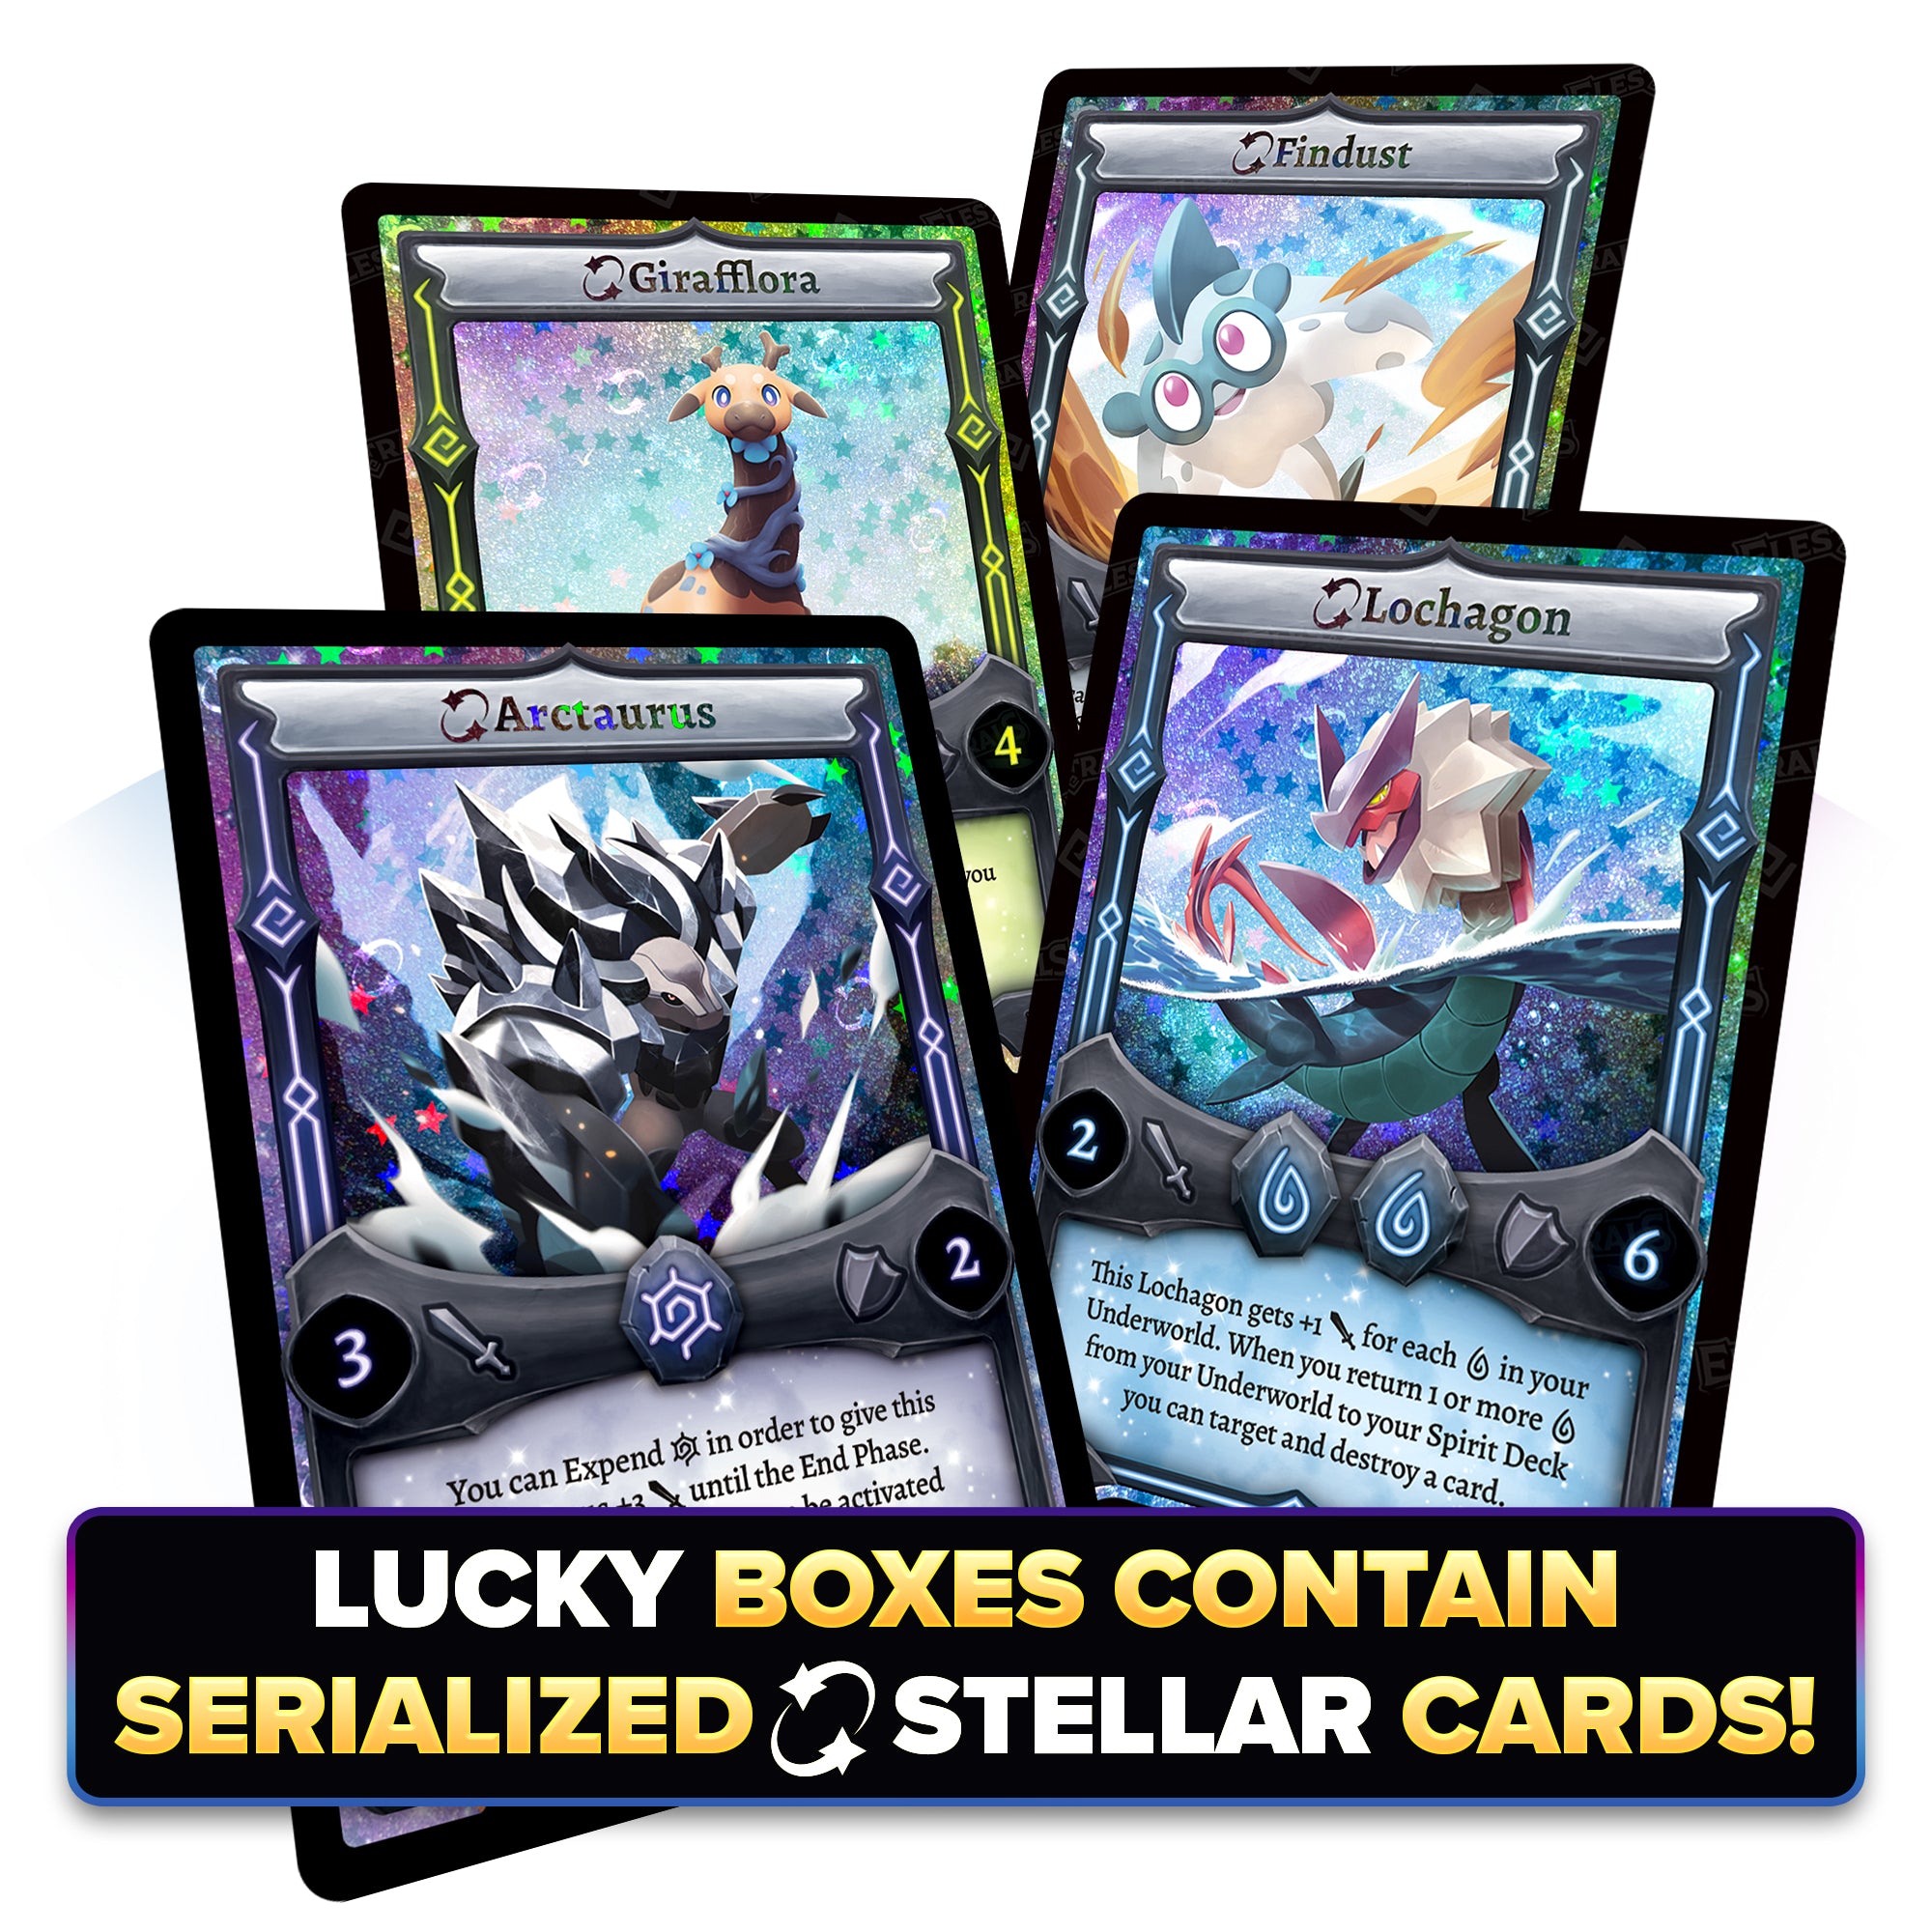 Frostfall Booster Box (36 Packs) (Preorder)